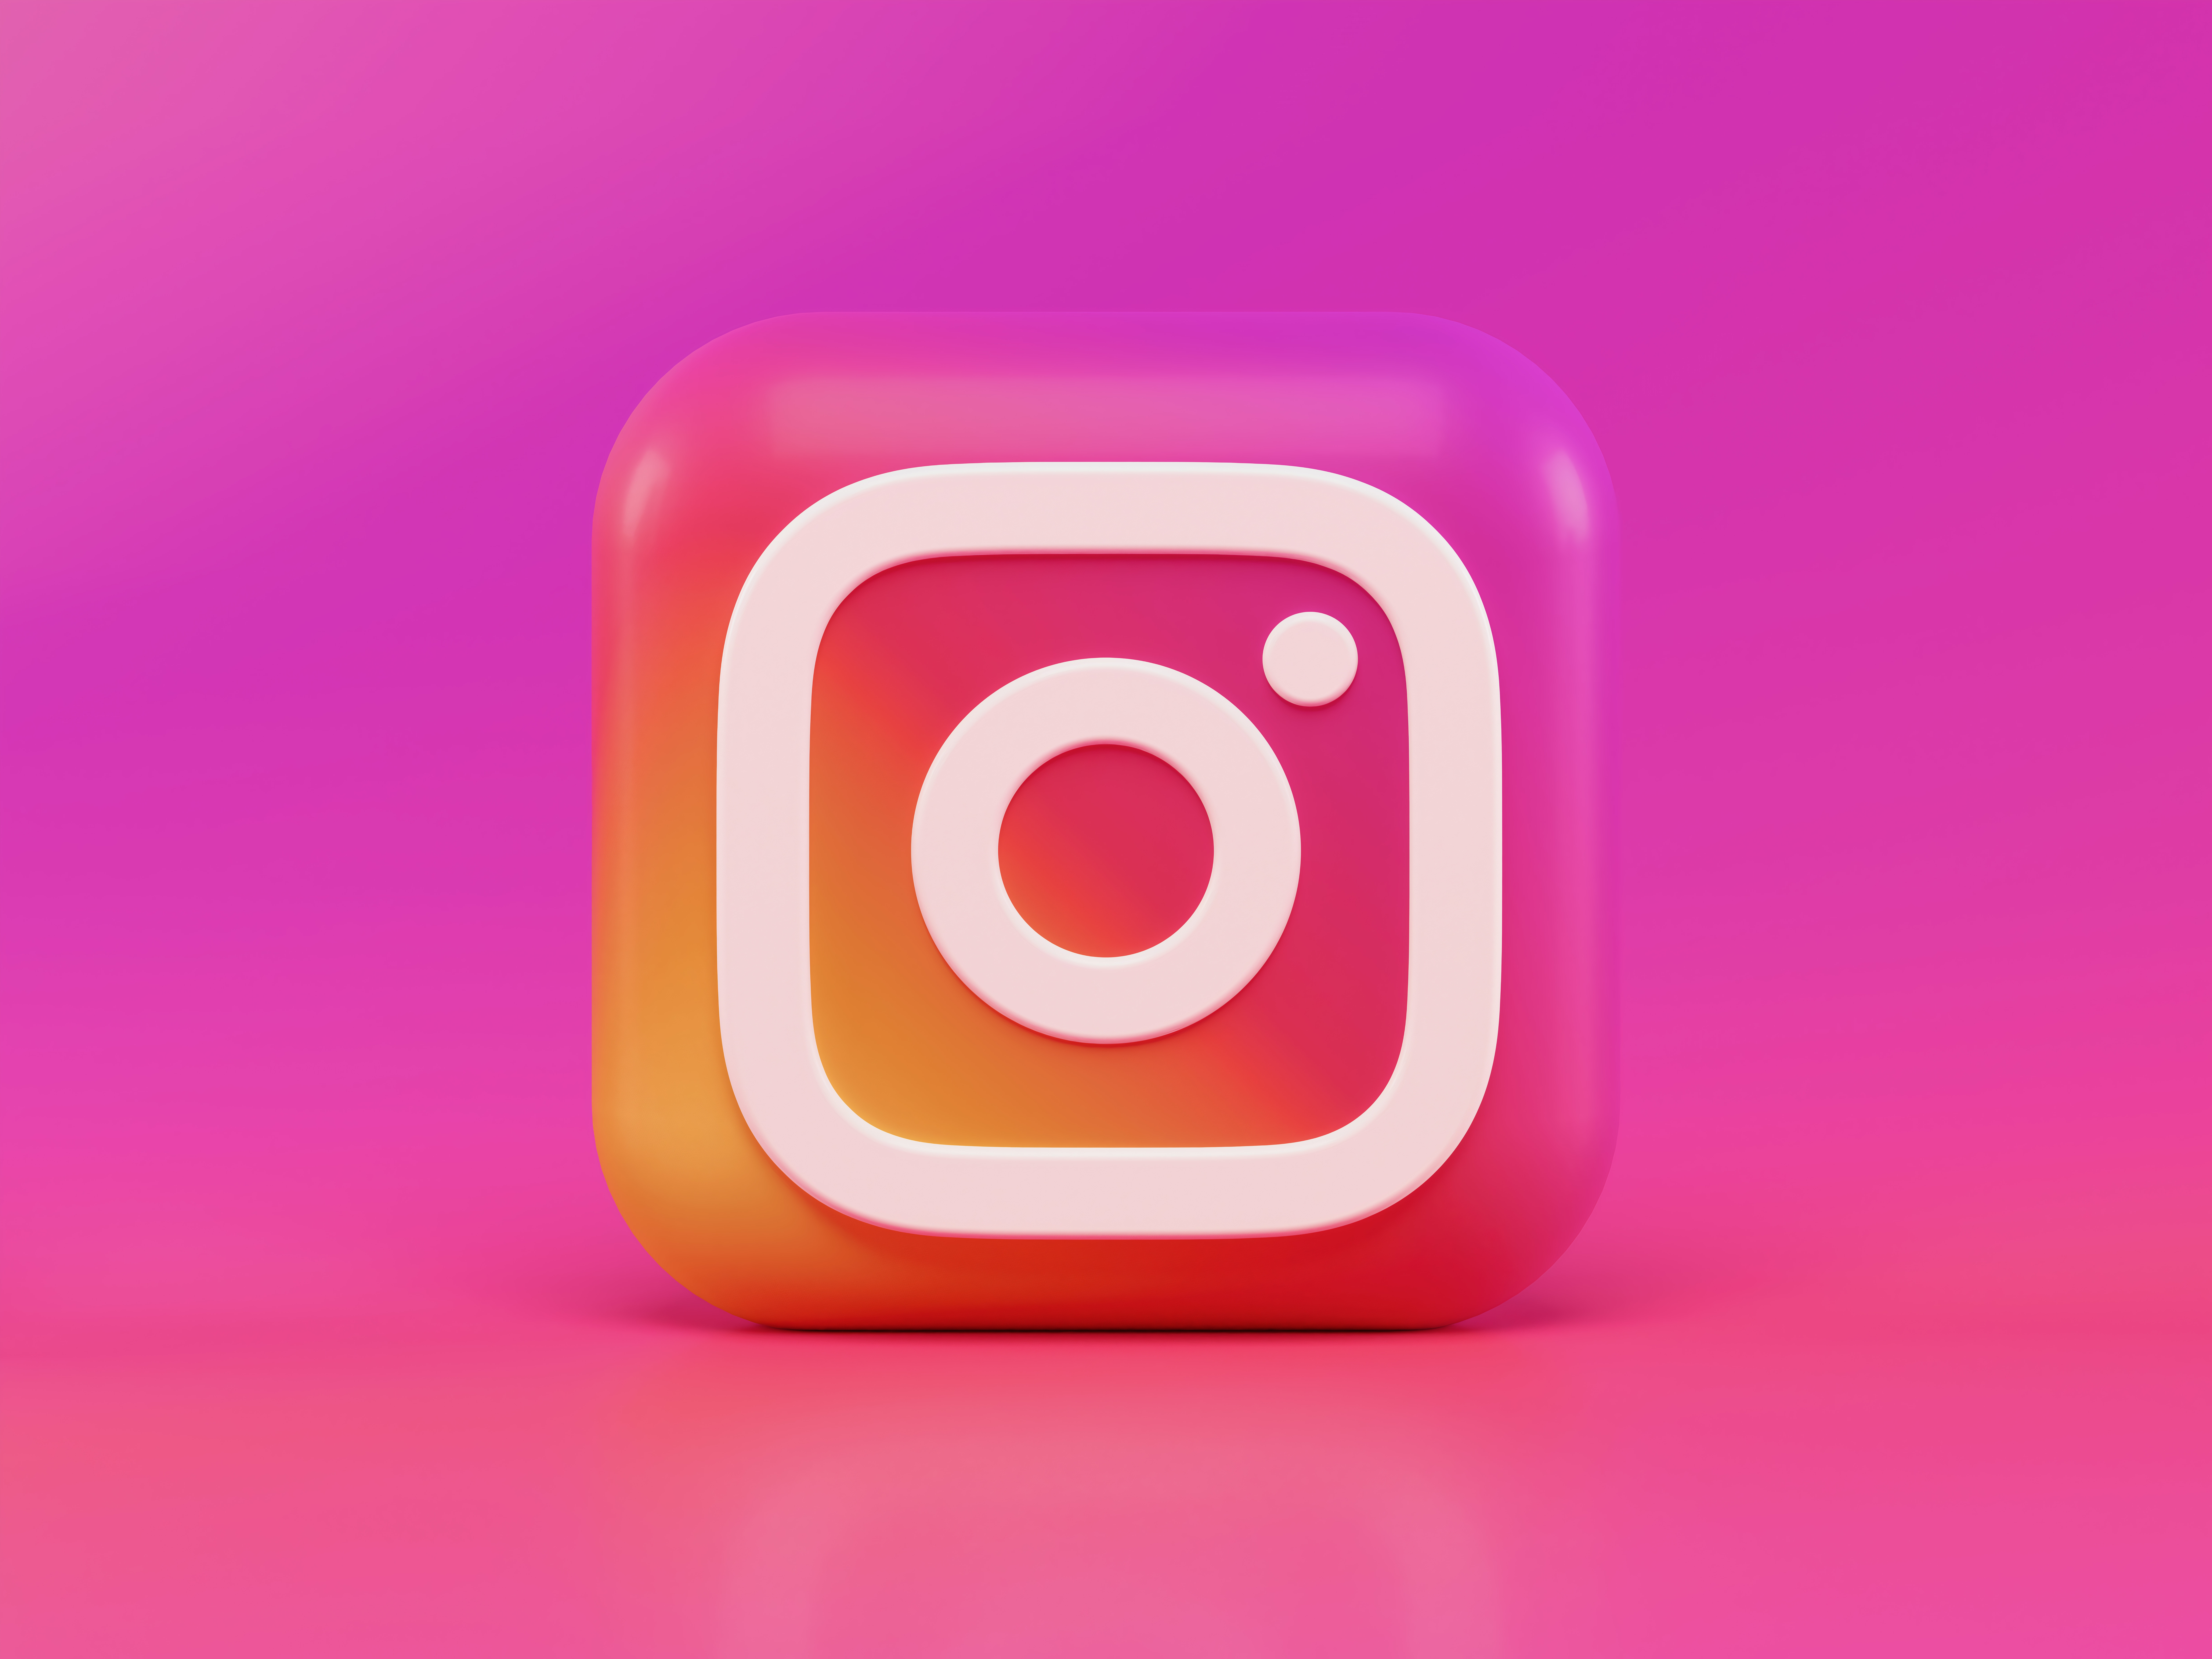 Instagram launches AI-powered image background editing tool